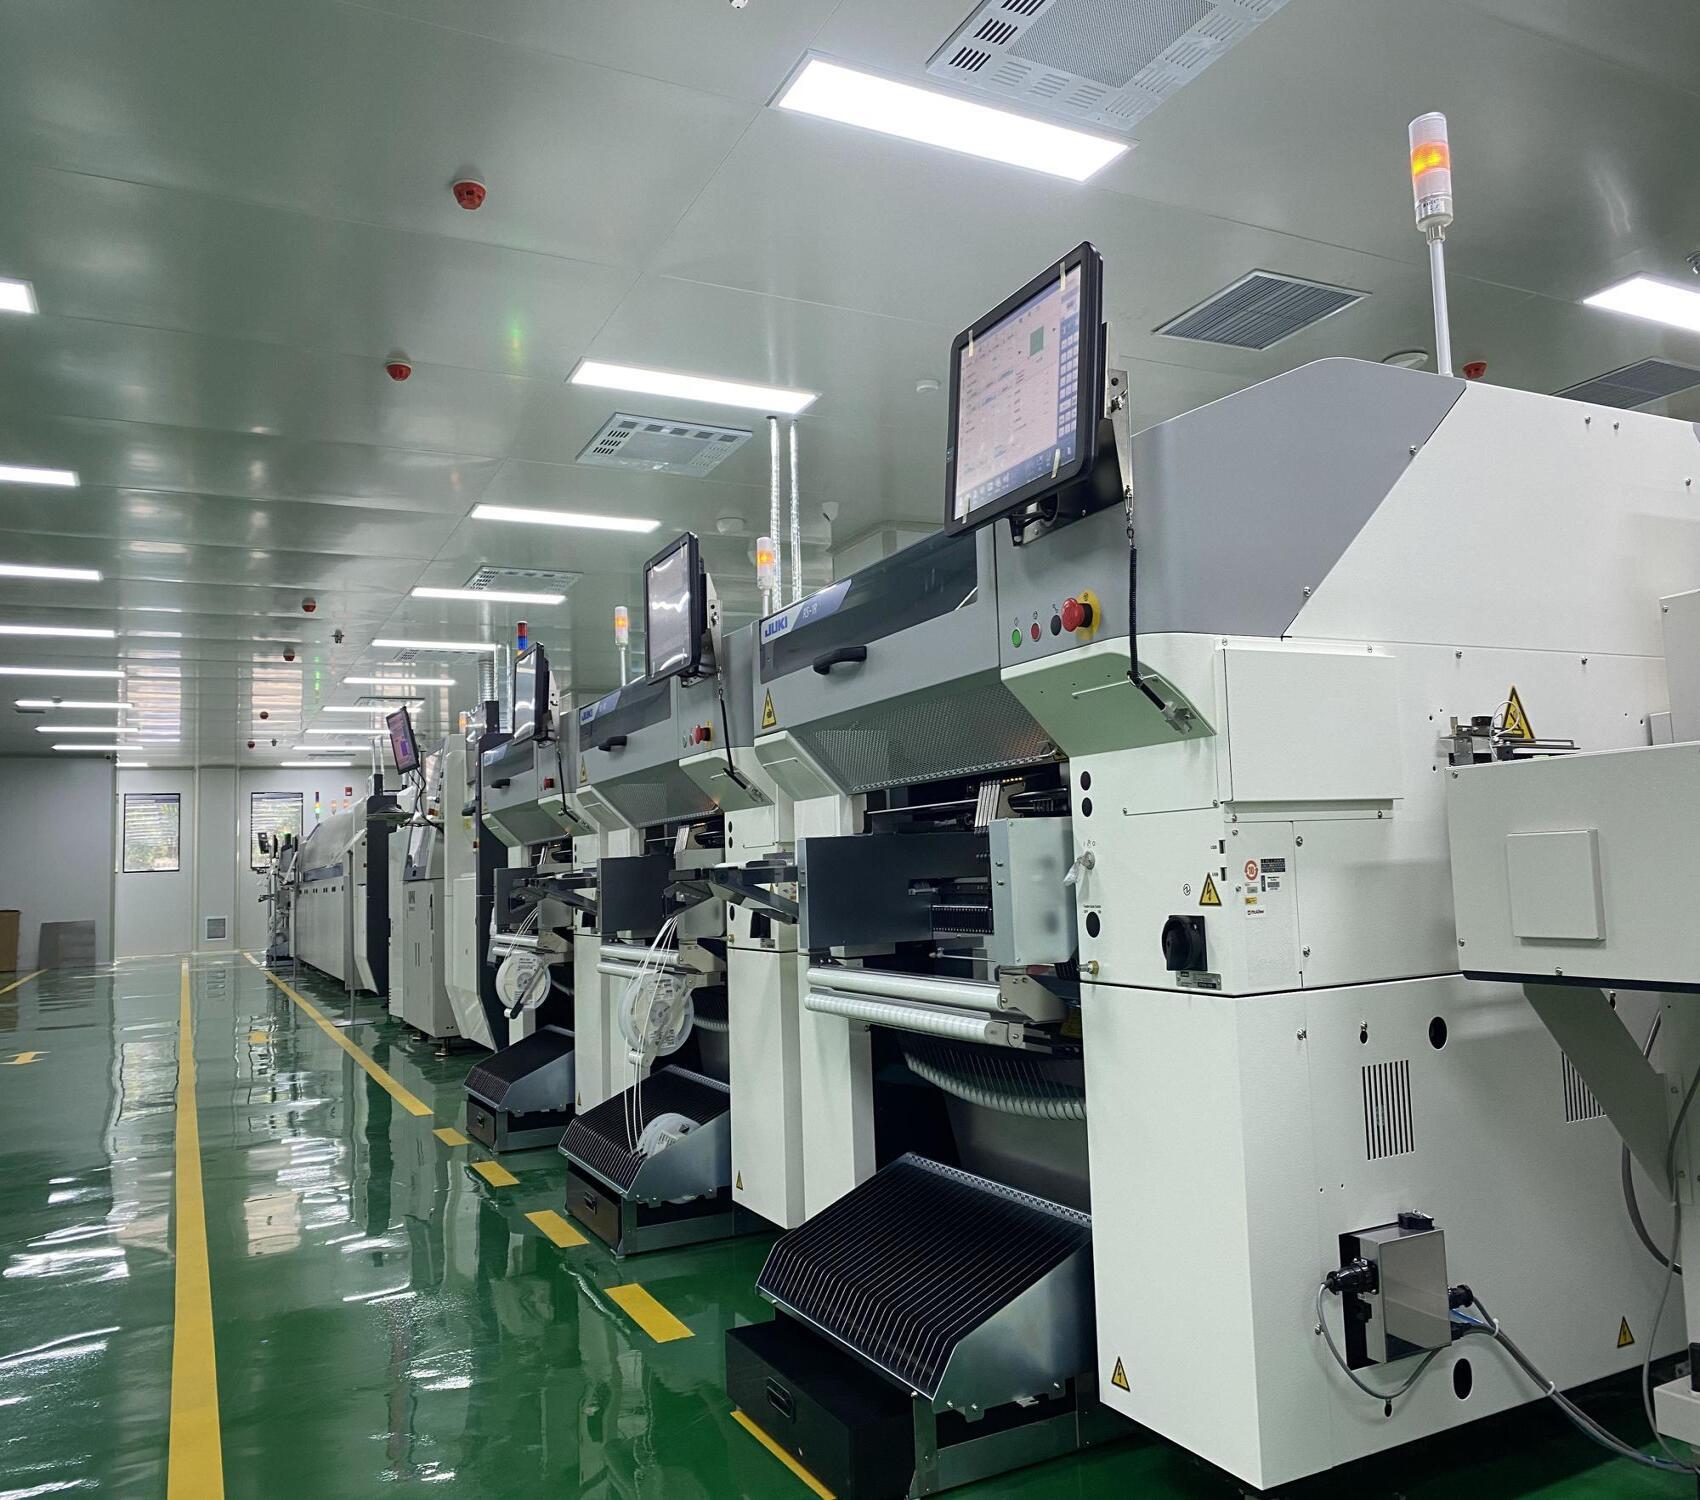 About PCB production capacity